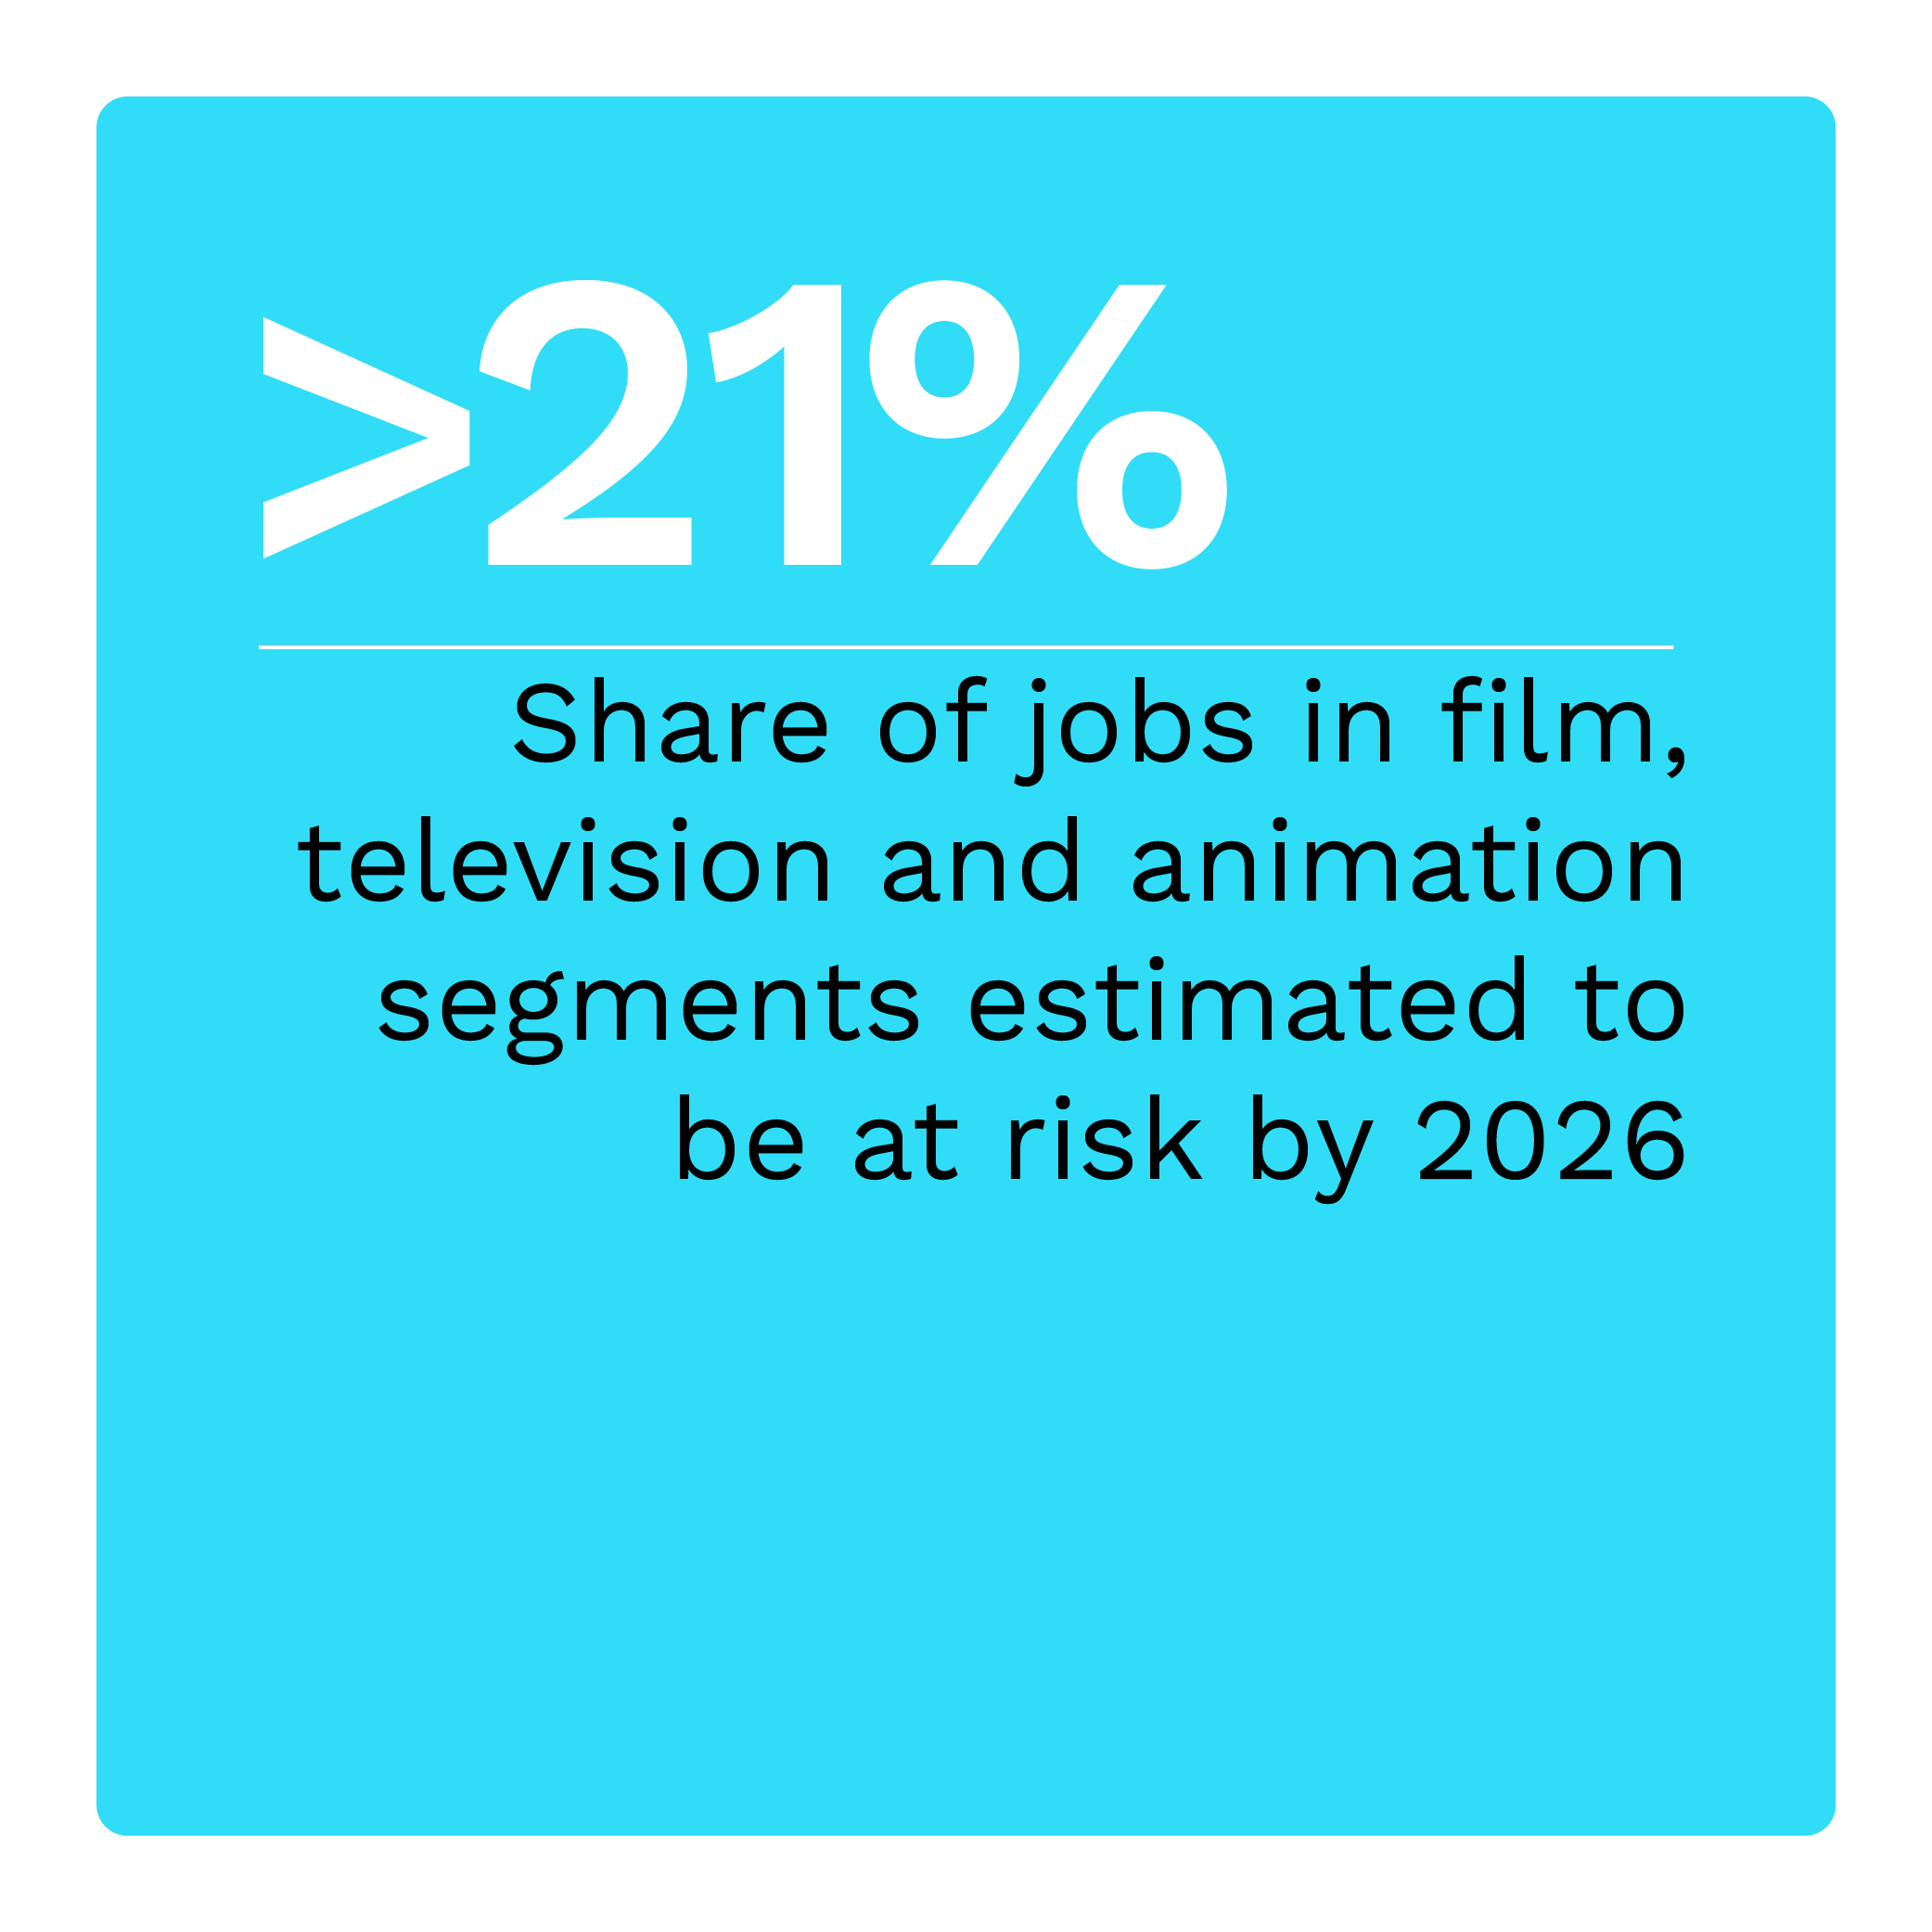 >21%: Share of jobs in film, television and animation segments estimated to be at risk by 2026